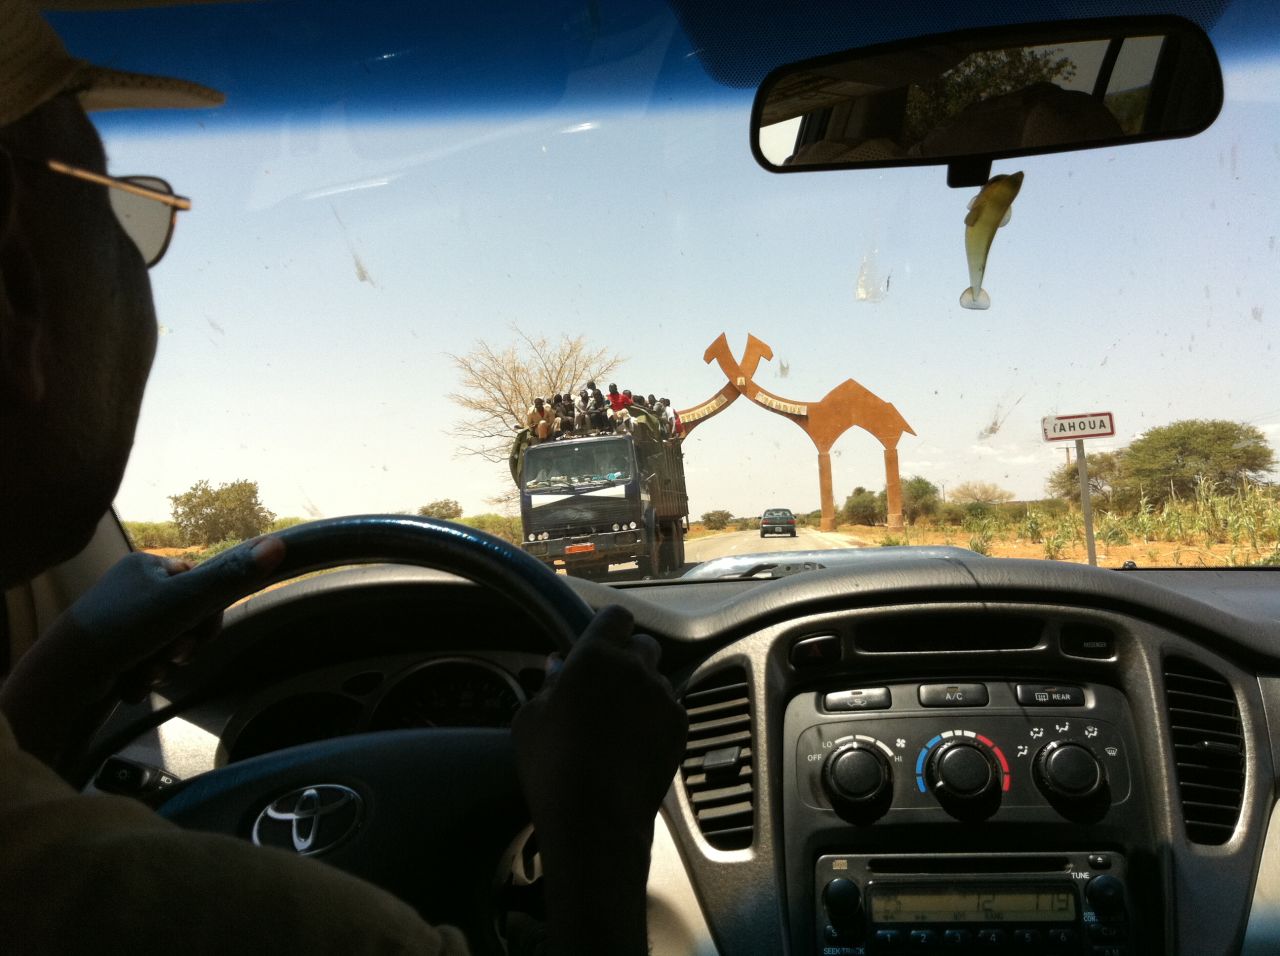 Driving along the road, camel-styled gates mark Tahoua, about 400 kilometers (270 miles) from Agadez.